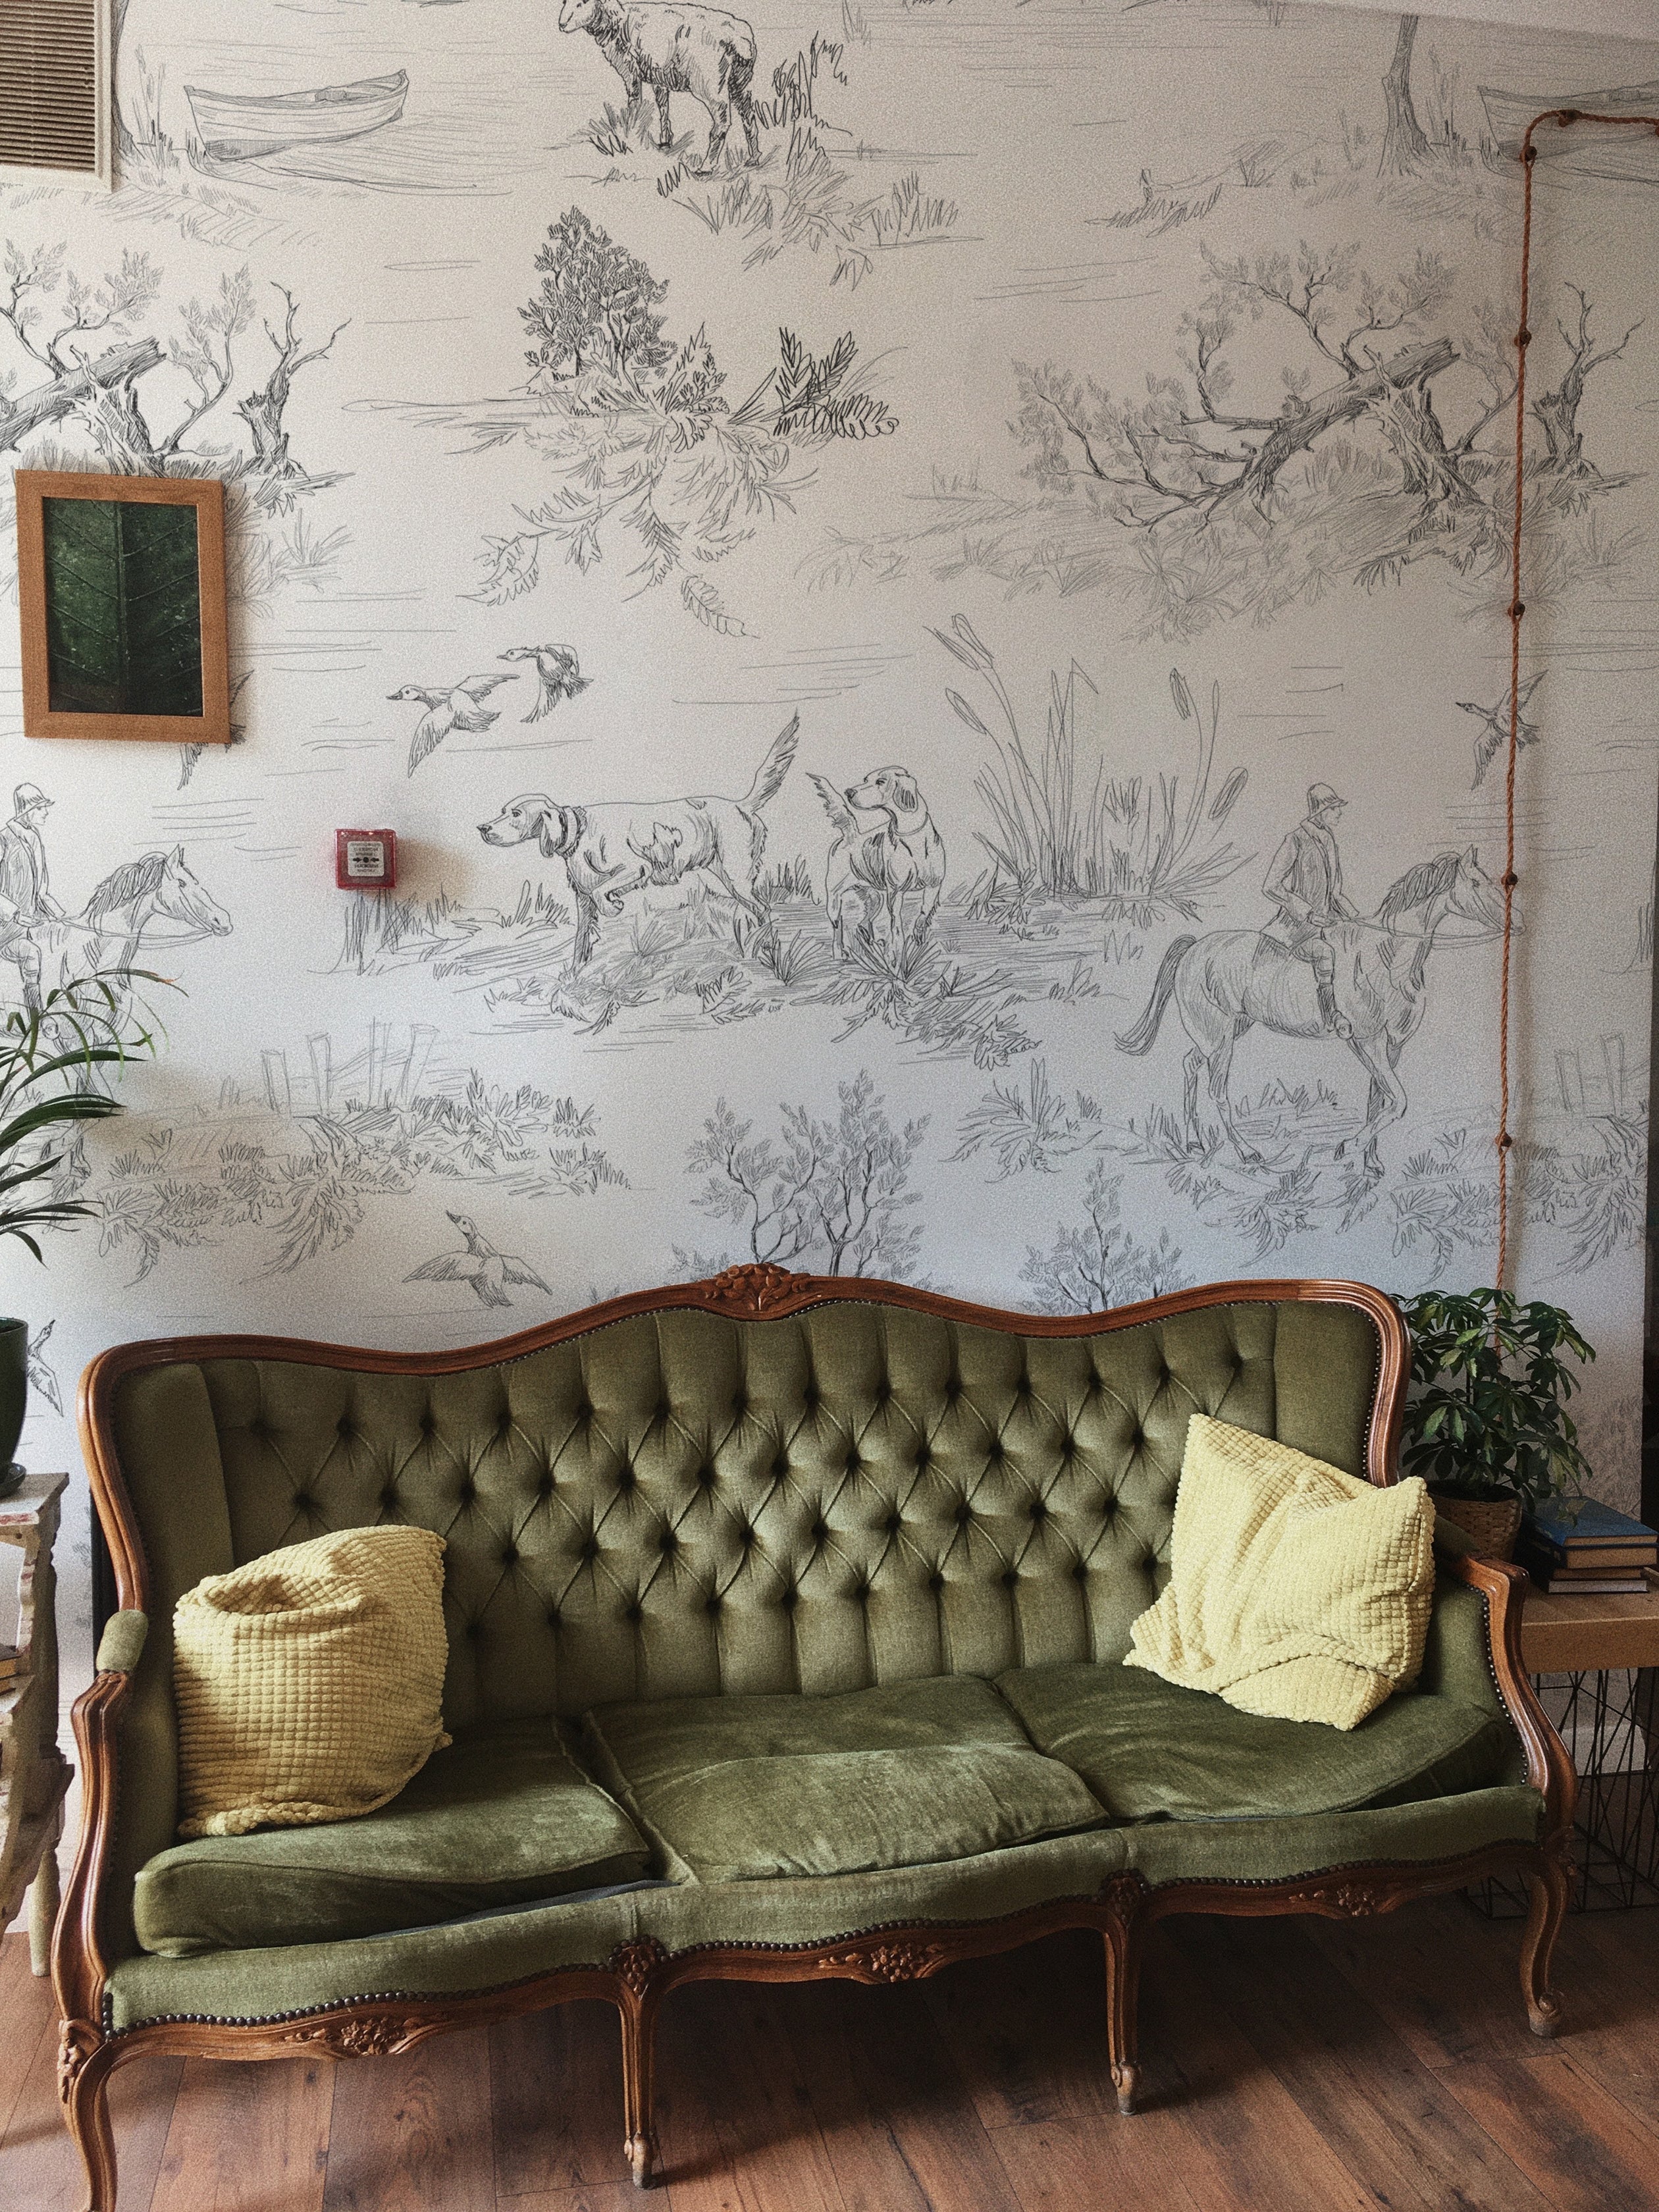 An elegant living room space highlighted by the Outdoor Friend Sketch Wallpaper. A vintage green velvet sofa with tufted backrest is set against the detailed sketch wallpaper, showing scenes of nature and outdoor activities, complemented by bright yellow pillows and indoor plants